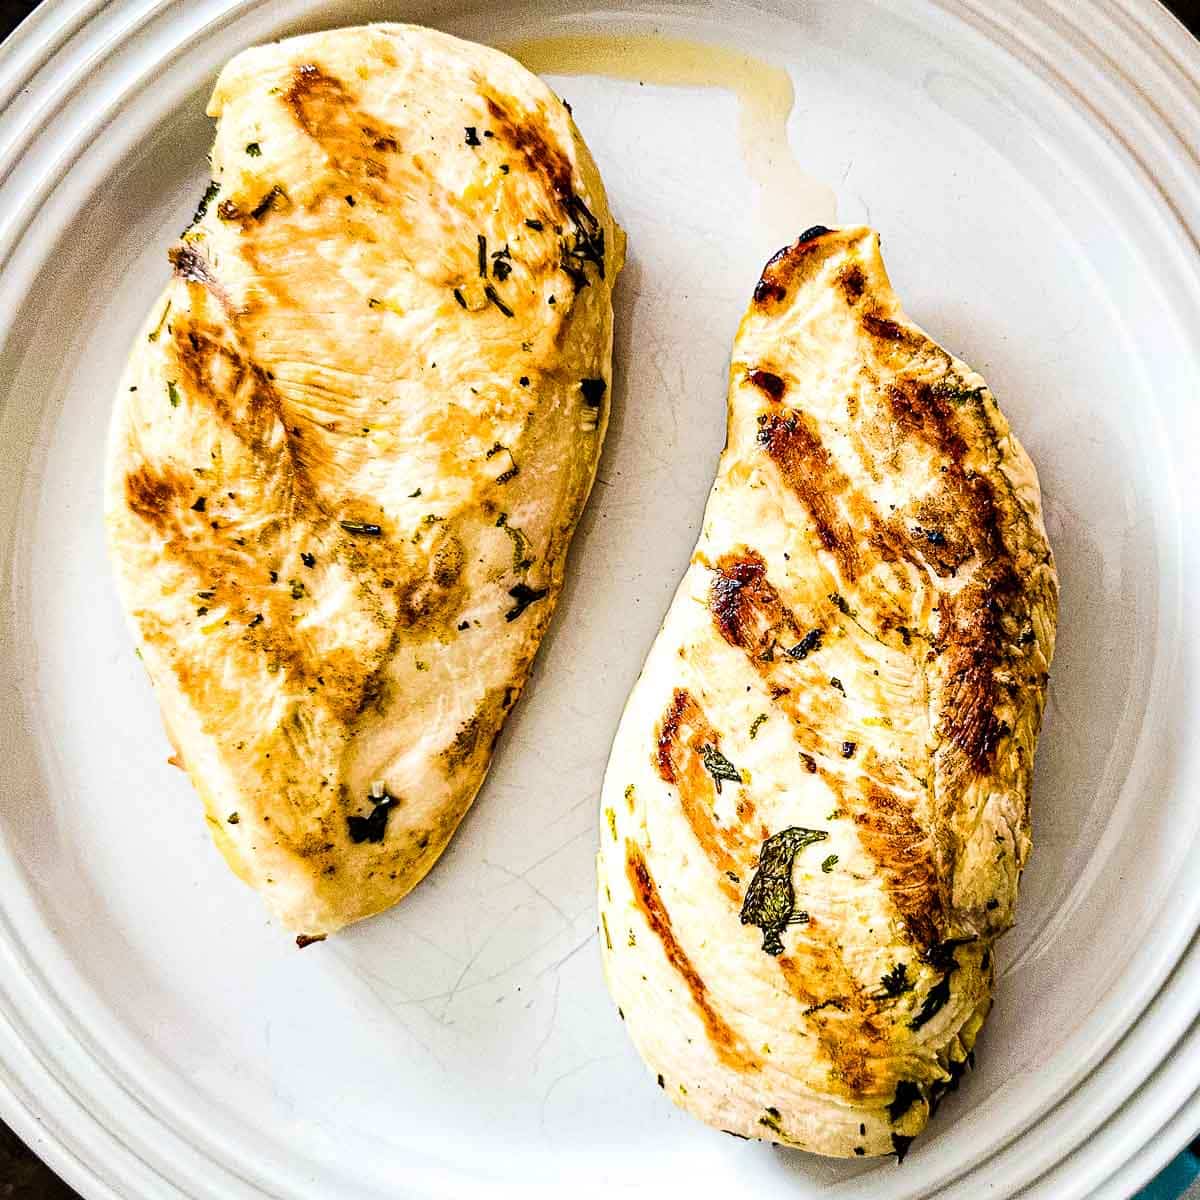 Grilled chicken resting on a white plate.